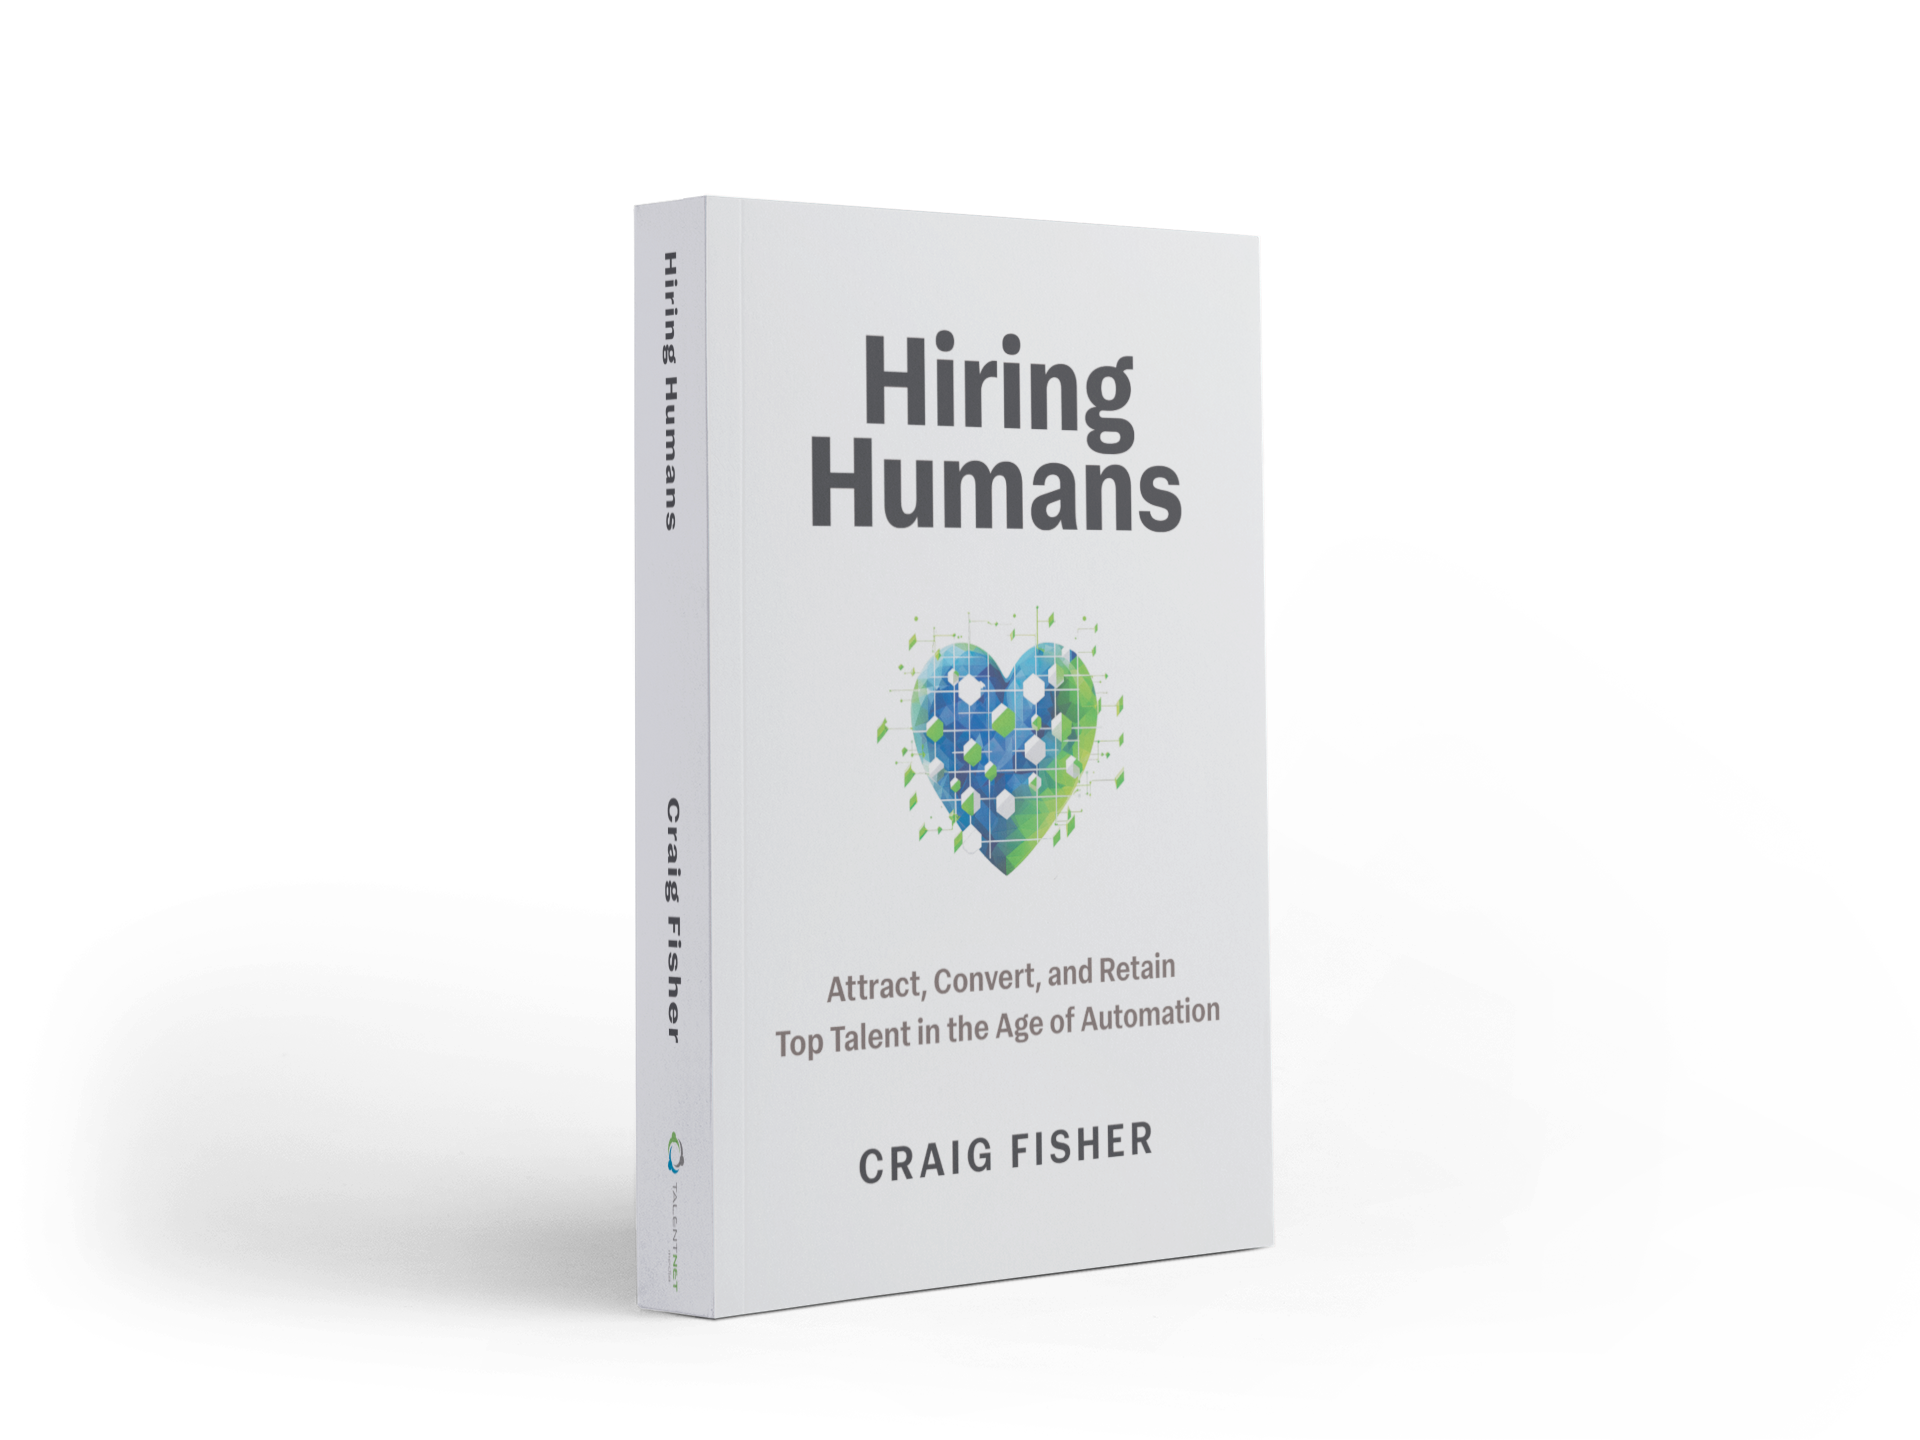 Hiring Humans book by Craig Fisher